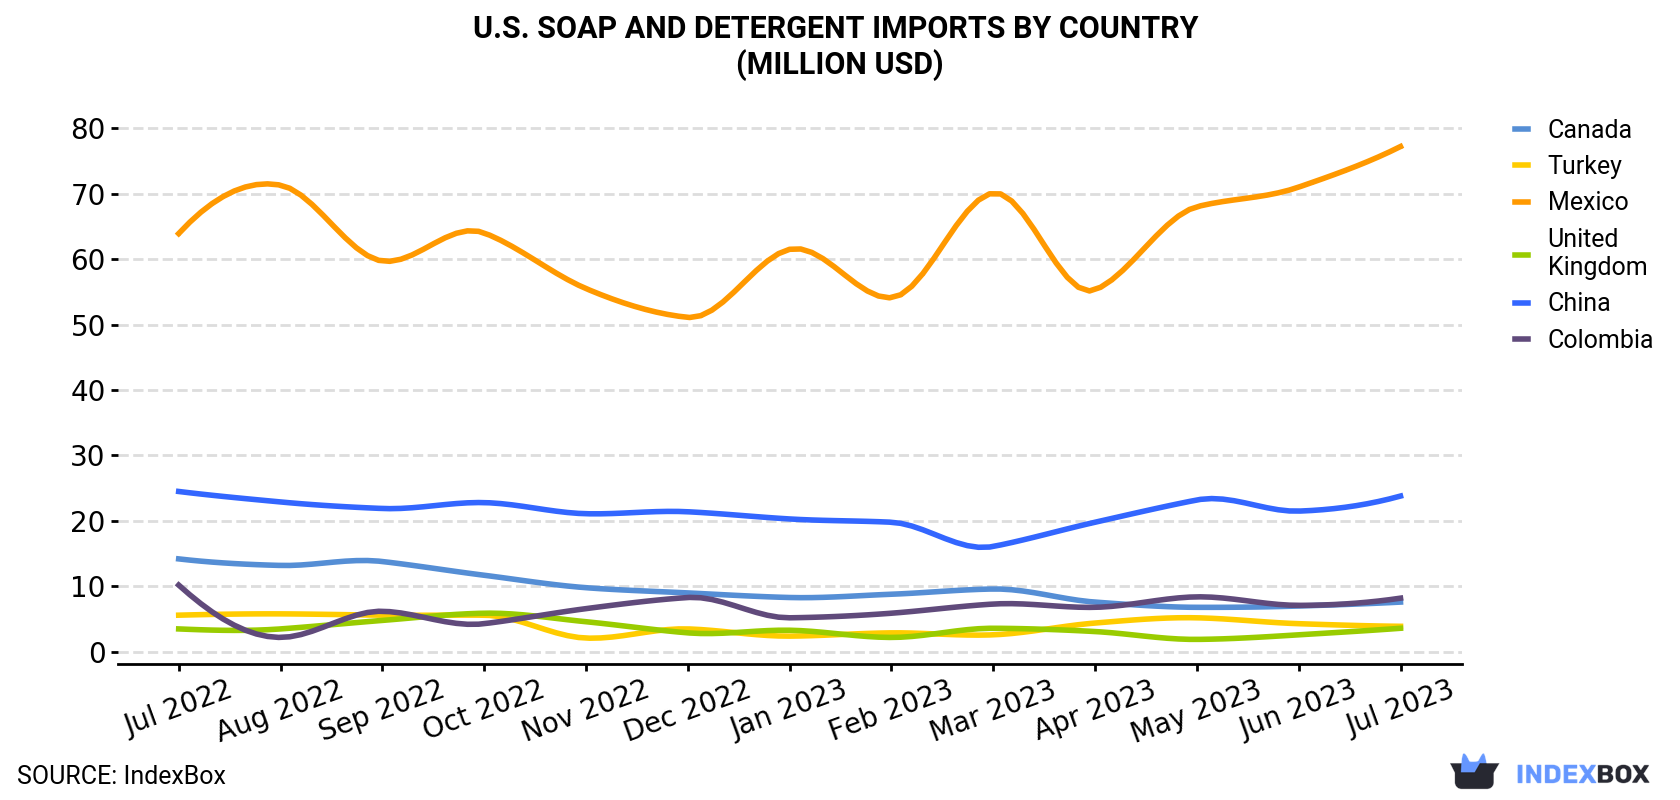 U.S. Soap And Detergent Imports By Country (Million USD)